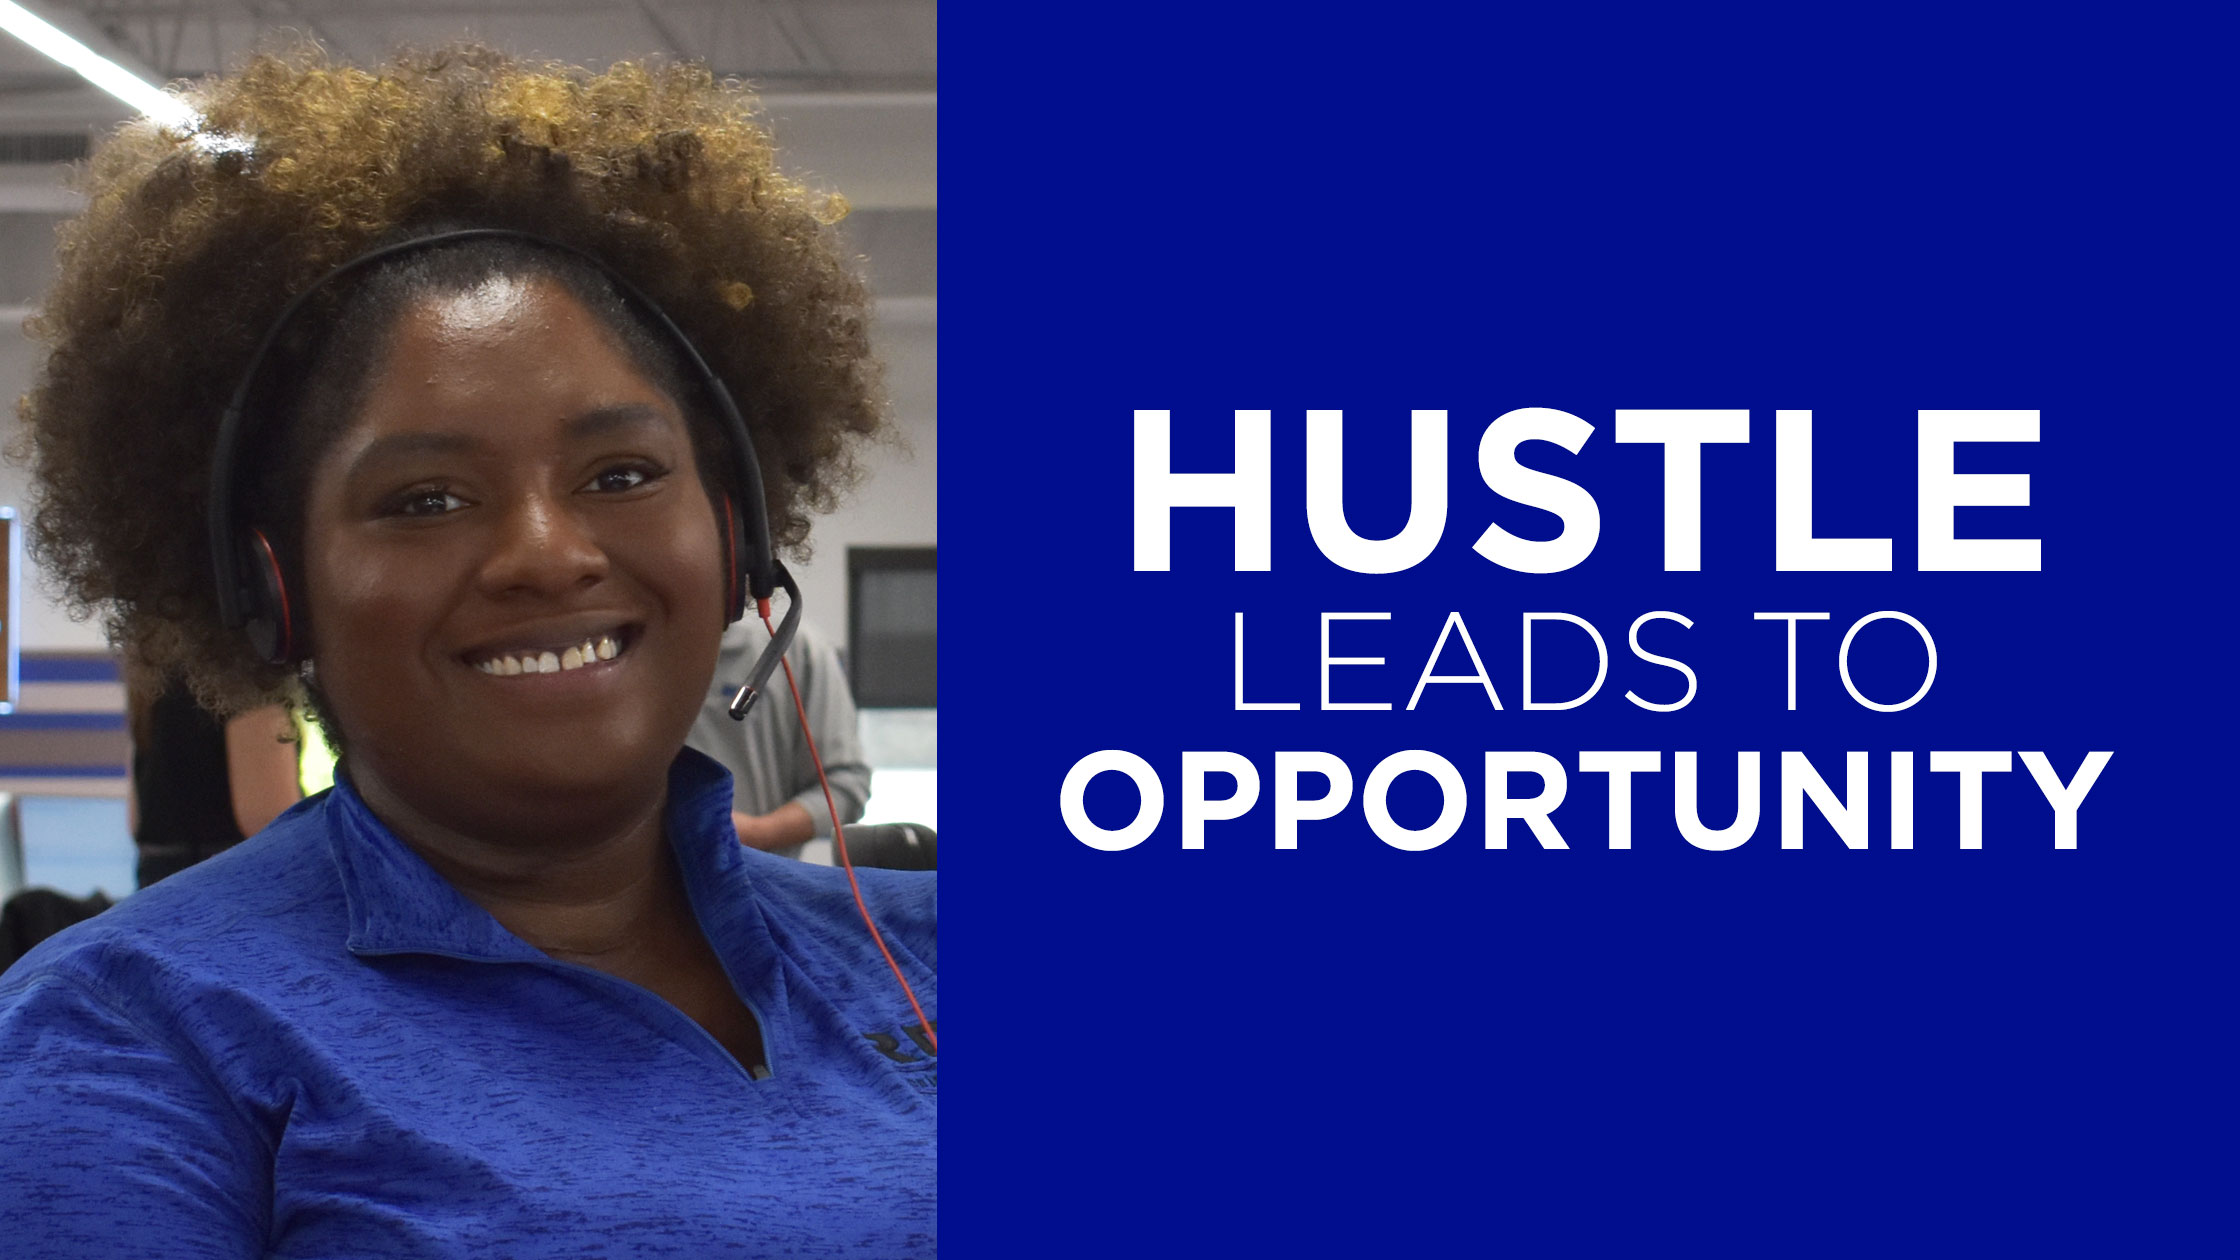 RDI Corporation - Hustle leads to opportunity